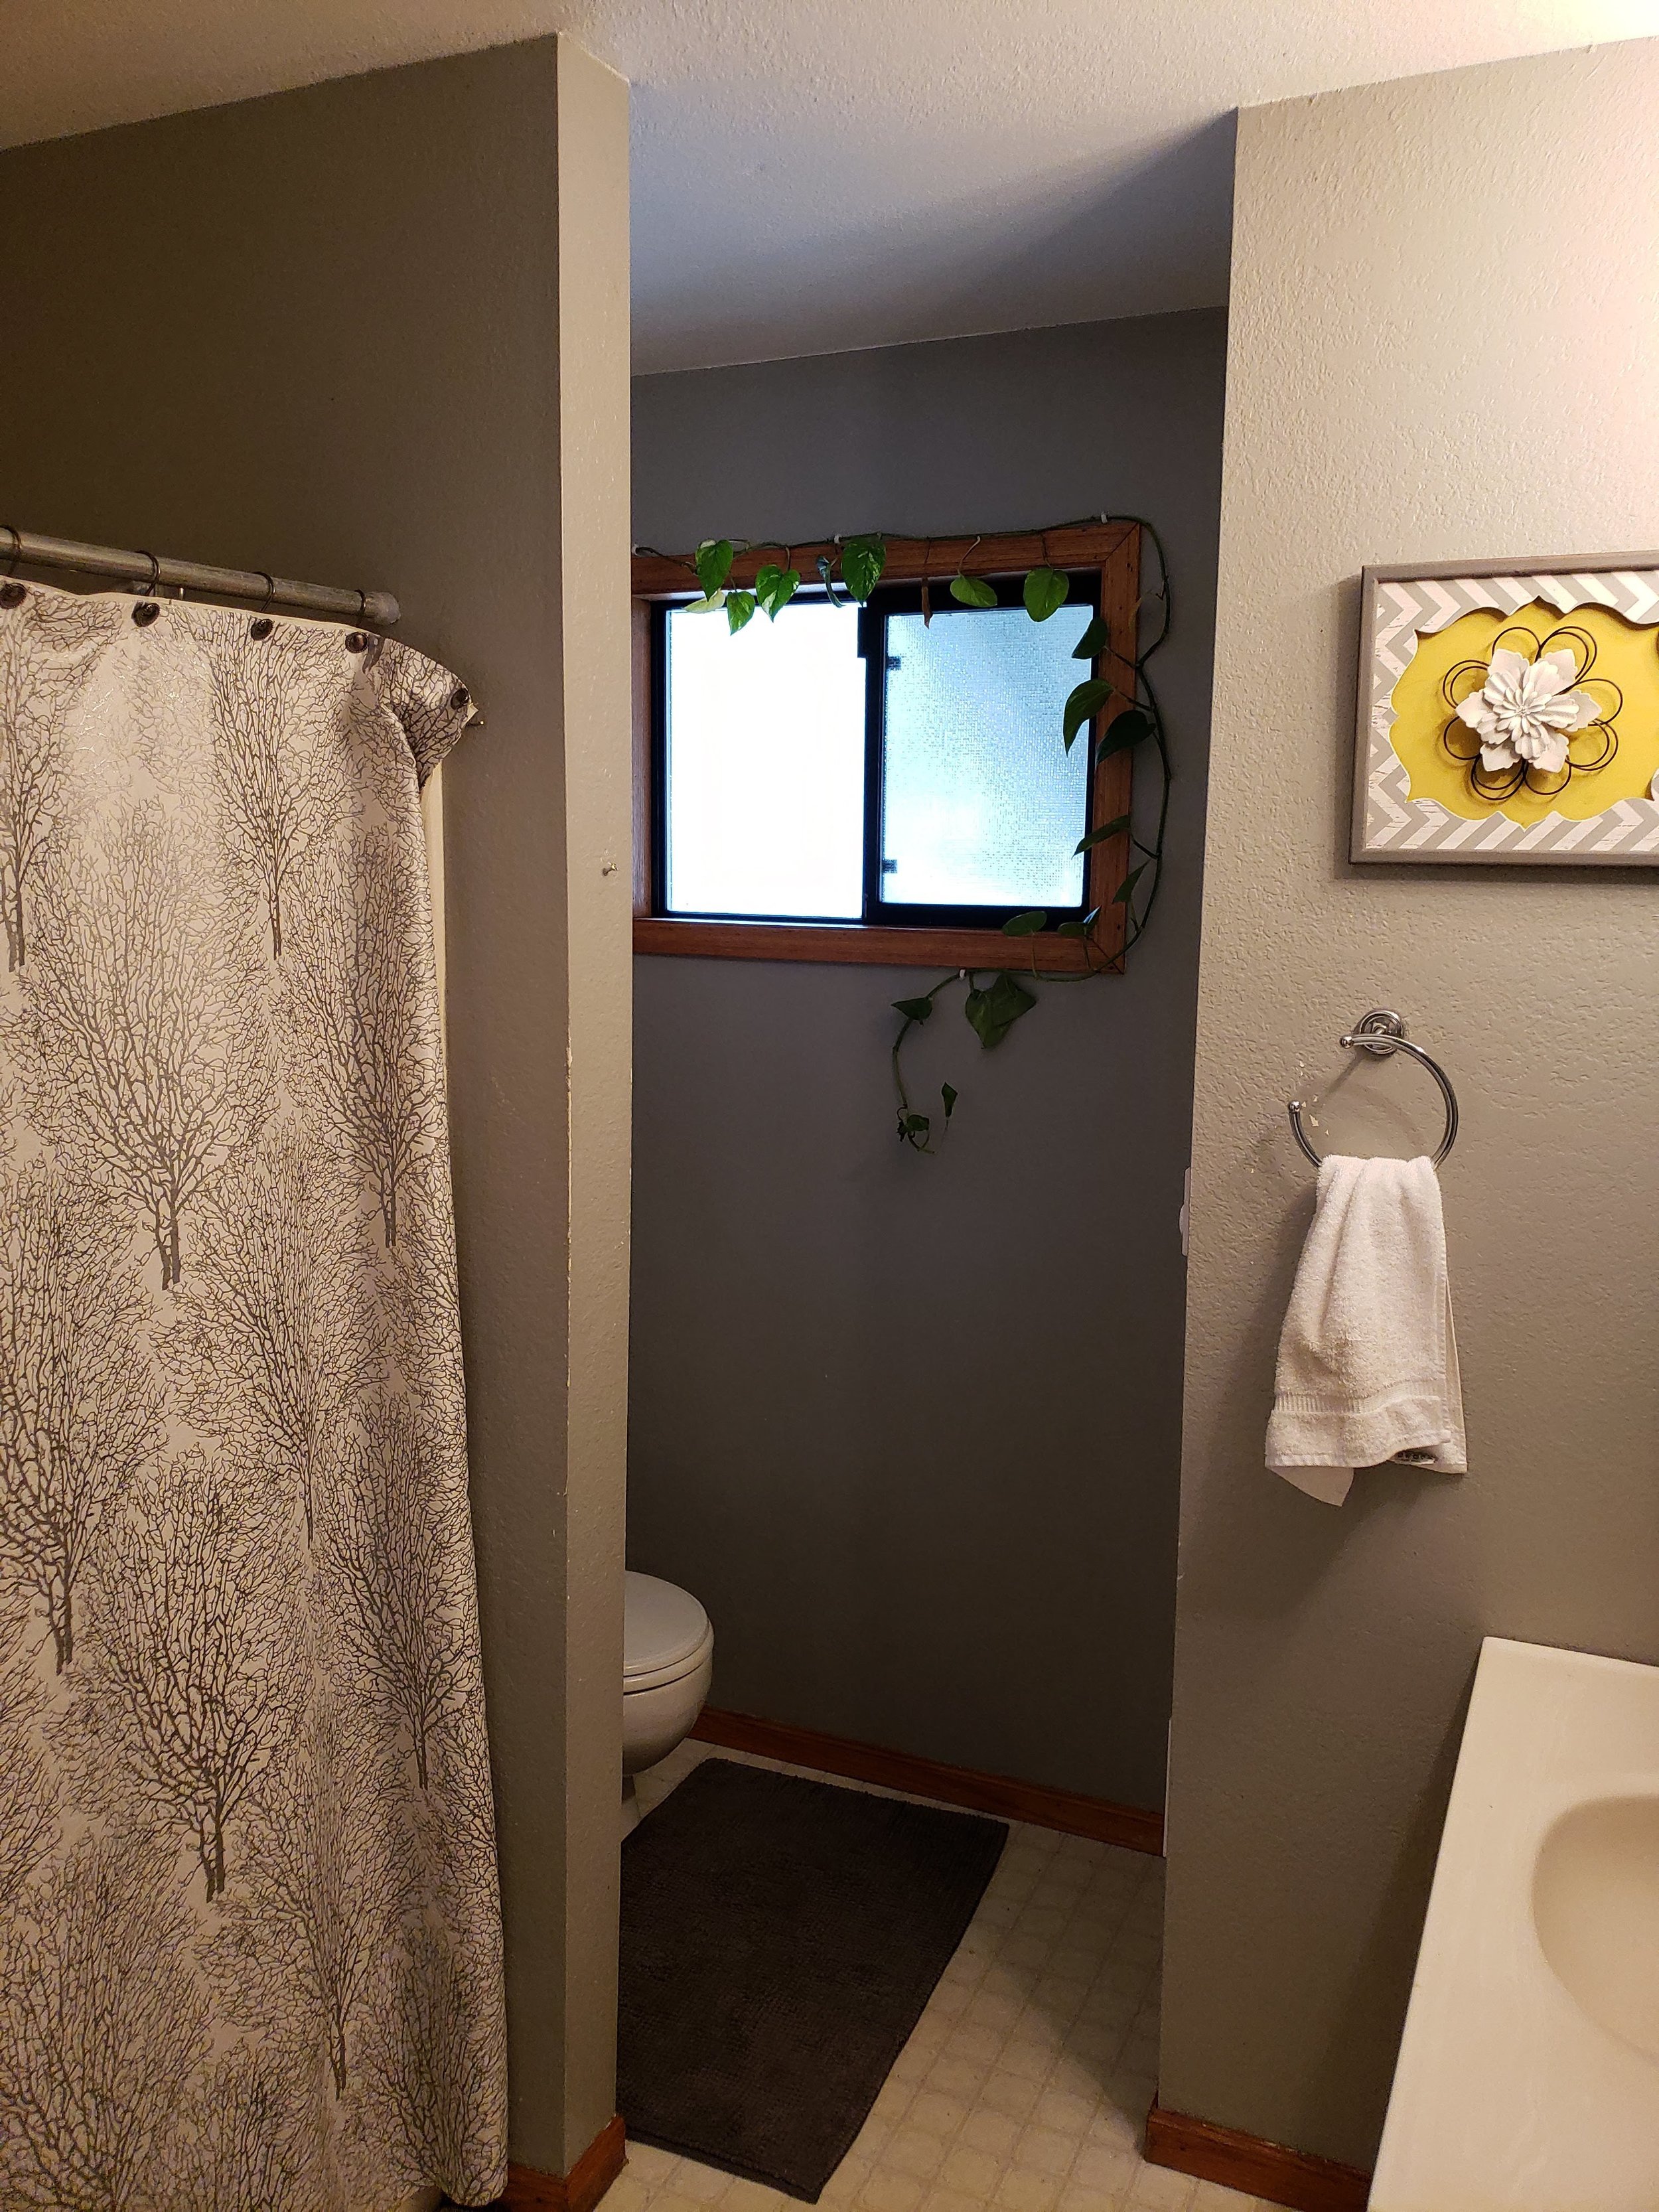 Copy of View of Bathroom Vanity, Shower, and Toilet